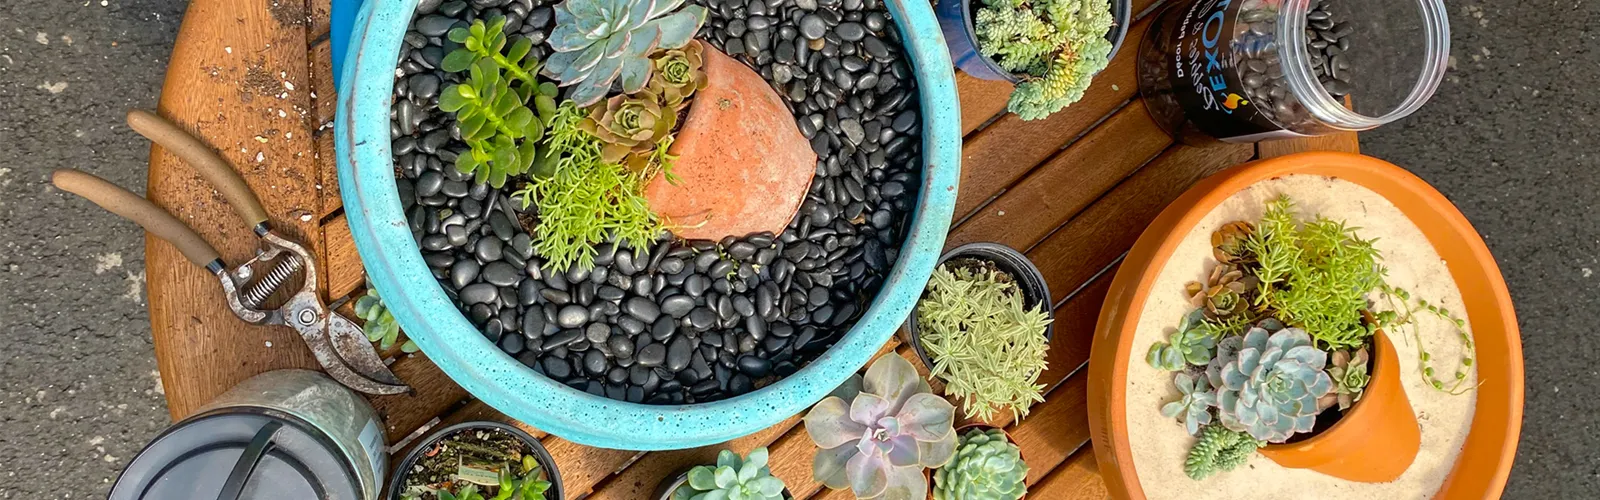 Succulents within pots